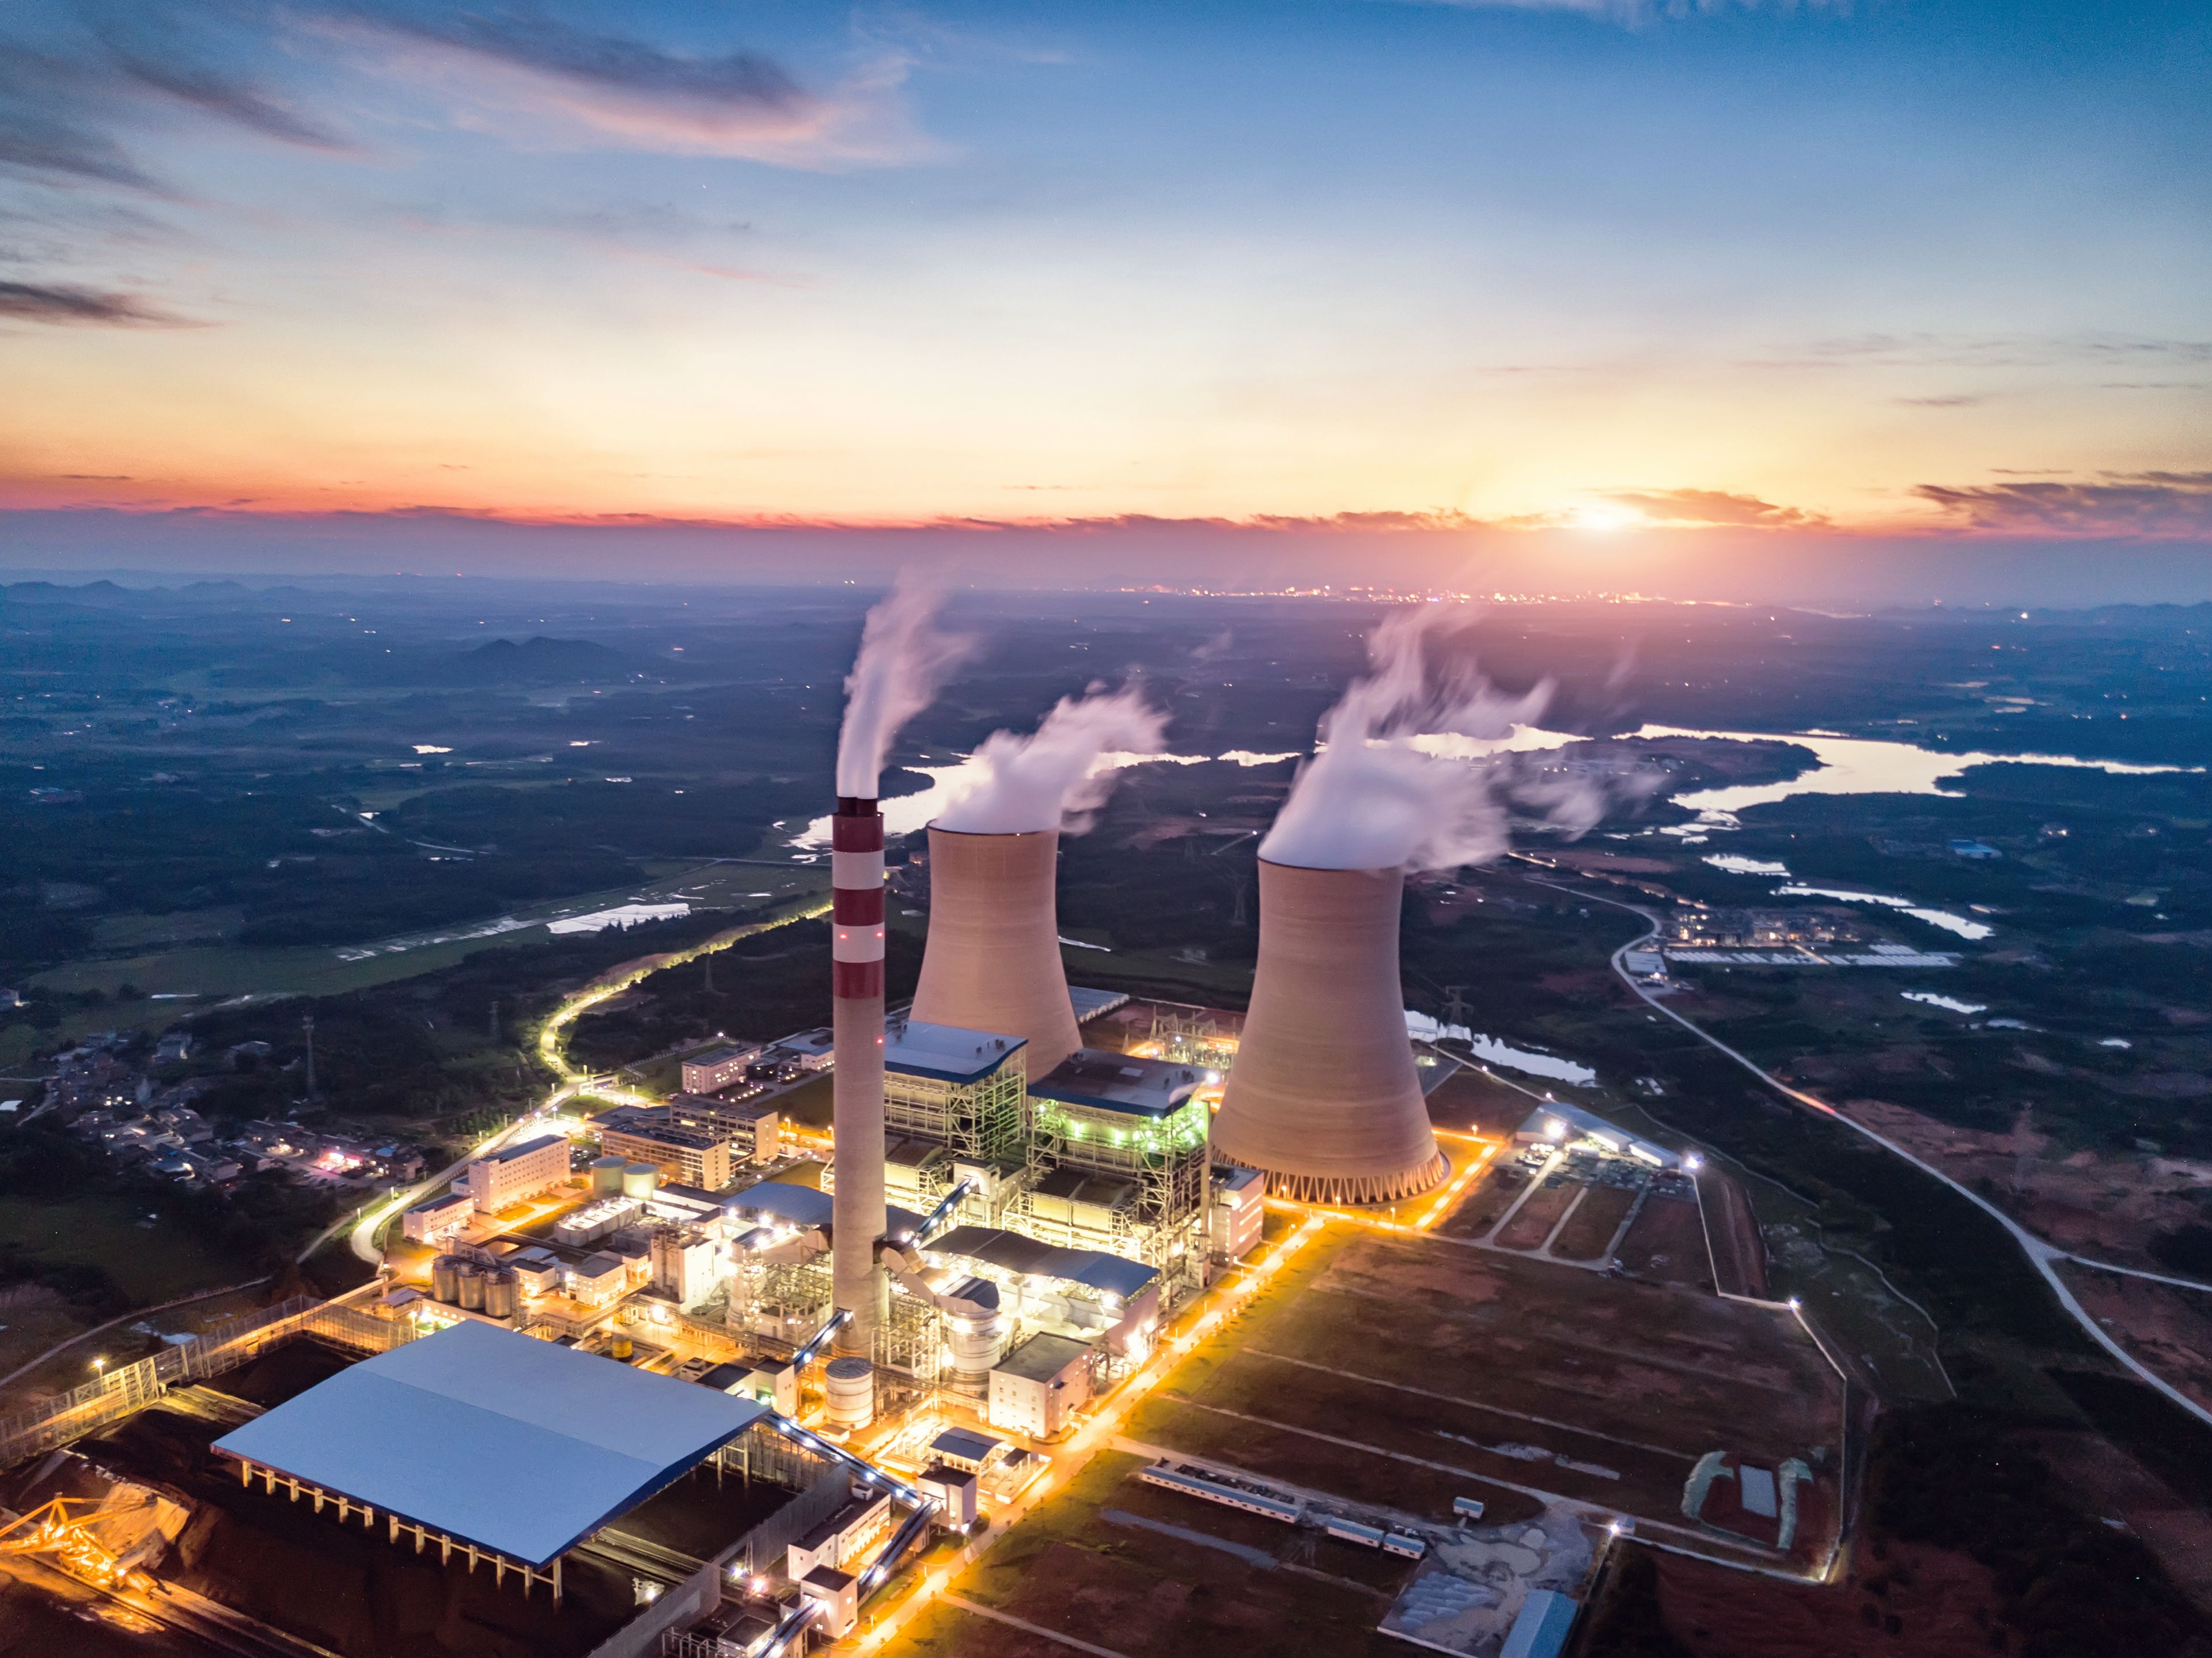 Thermal power generation - Rugged communications for electric power systems  - Siemens Global Website